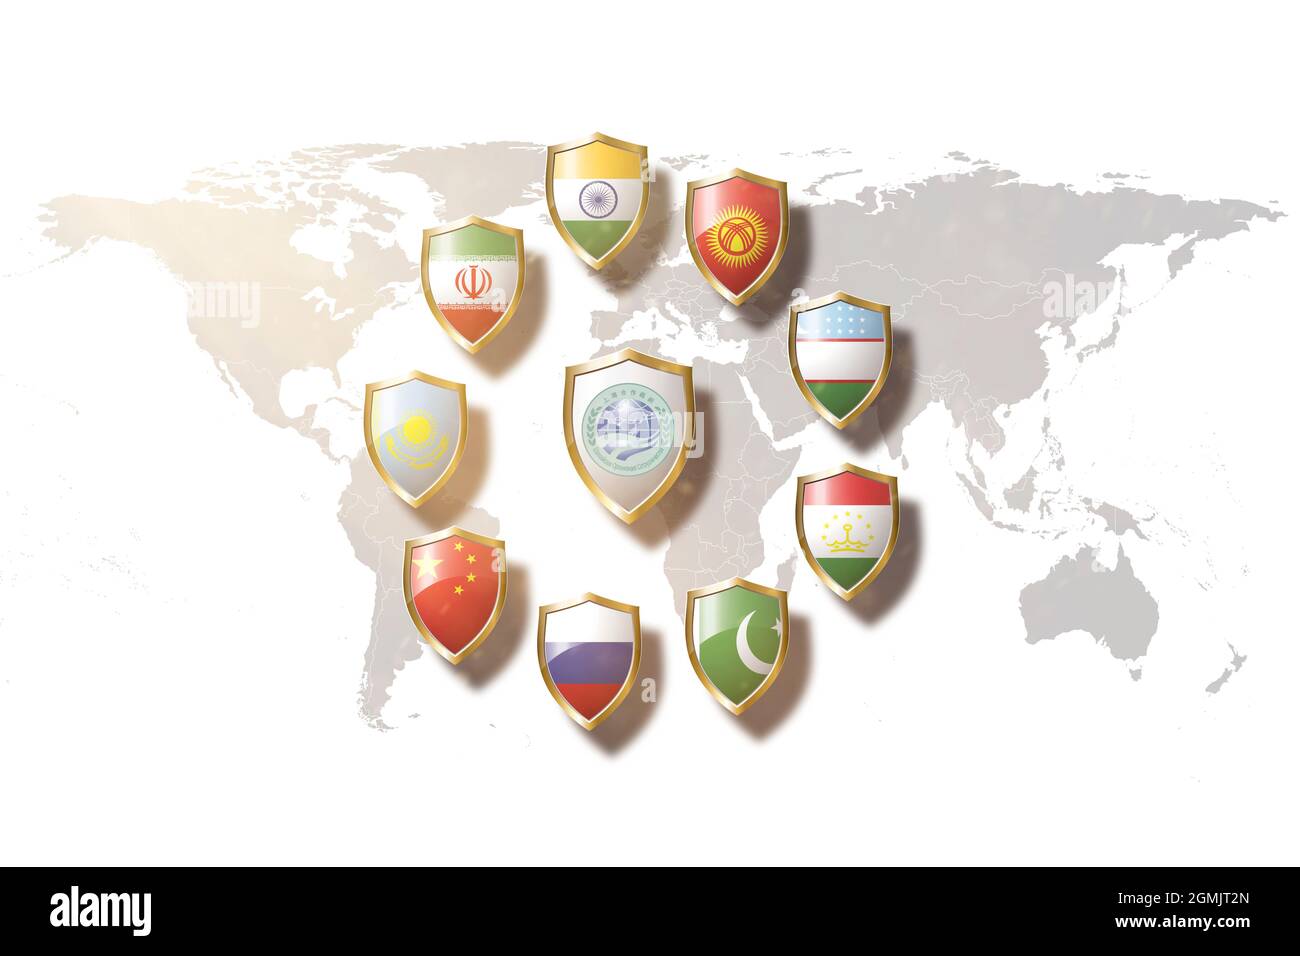 Shanghai Cooperation Organization (SCO) countries flags in golden shield on world map background.sco new permanent member iran. Stock Photo